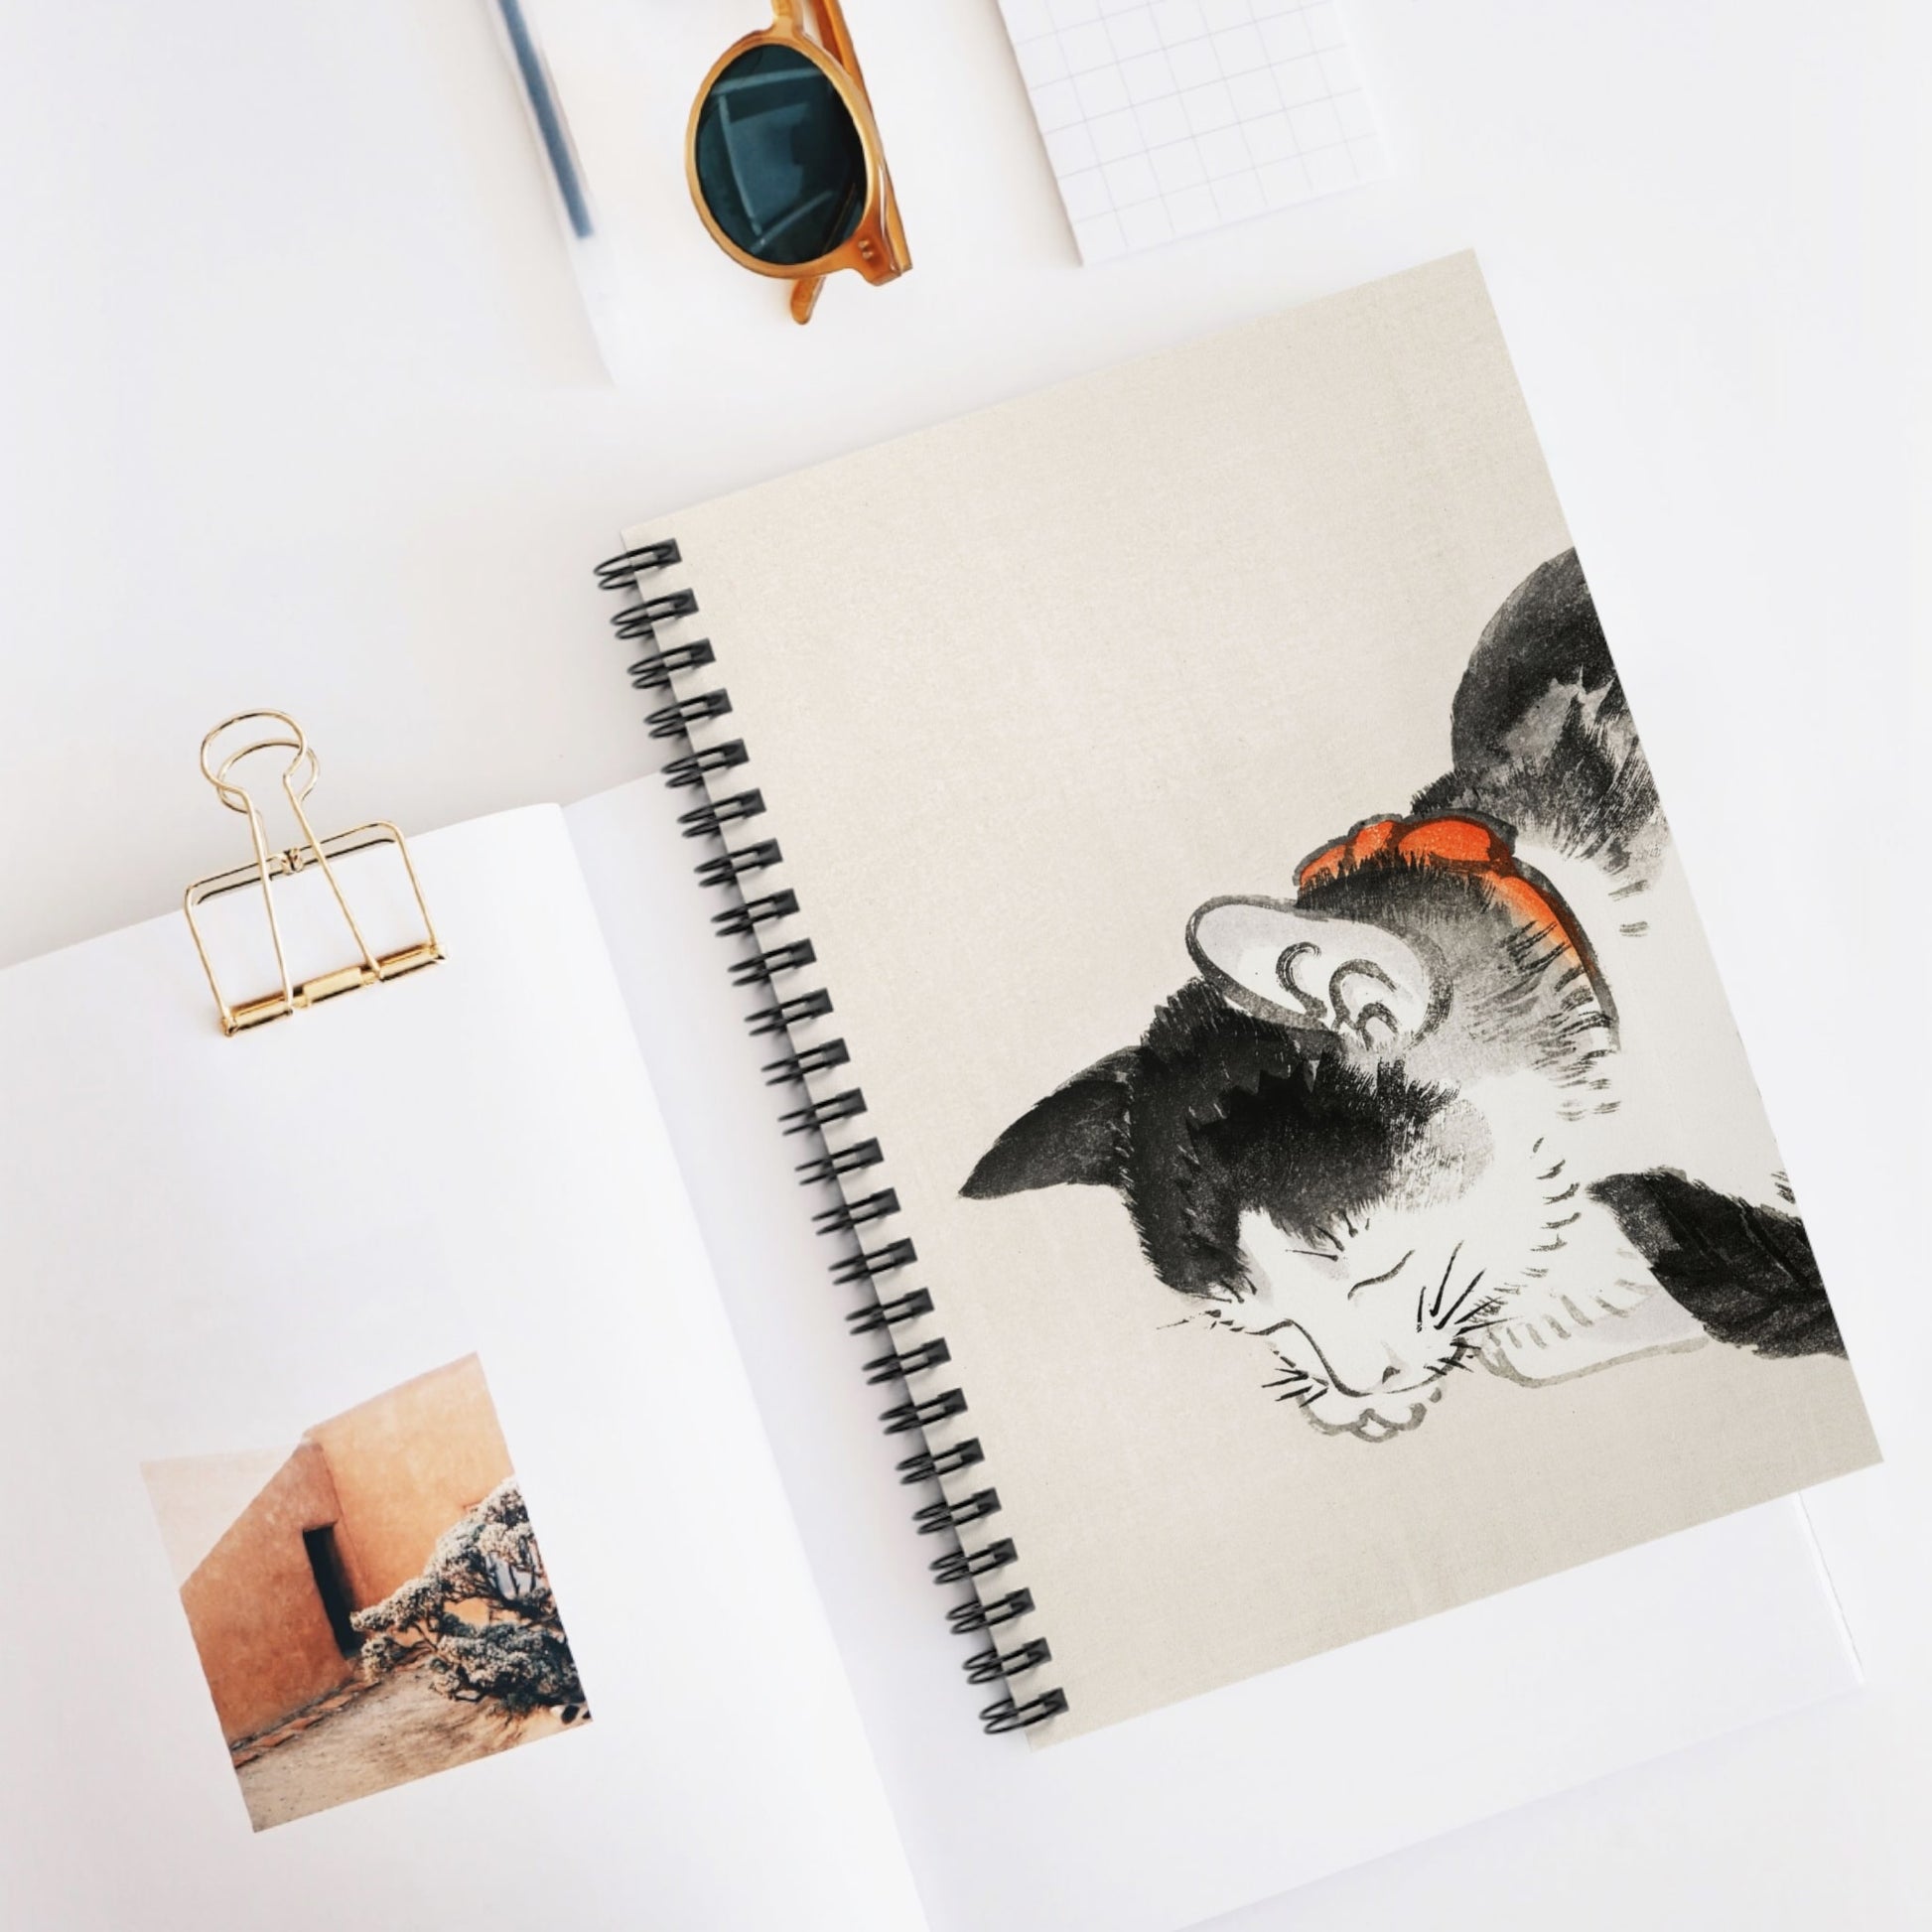 Japanese Black and White Cat Spiral Notebook Displayed on Desk